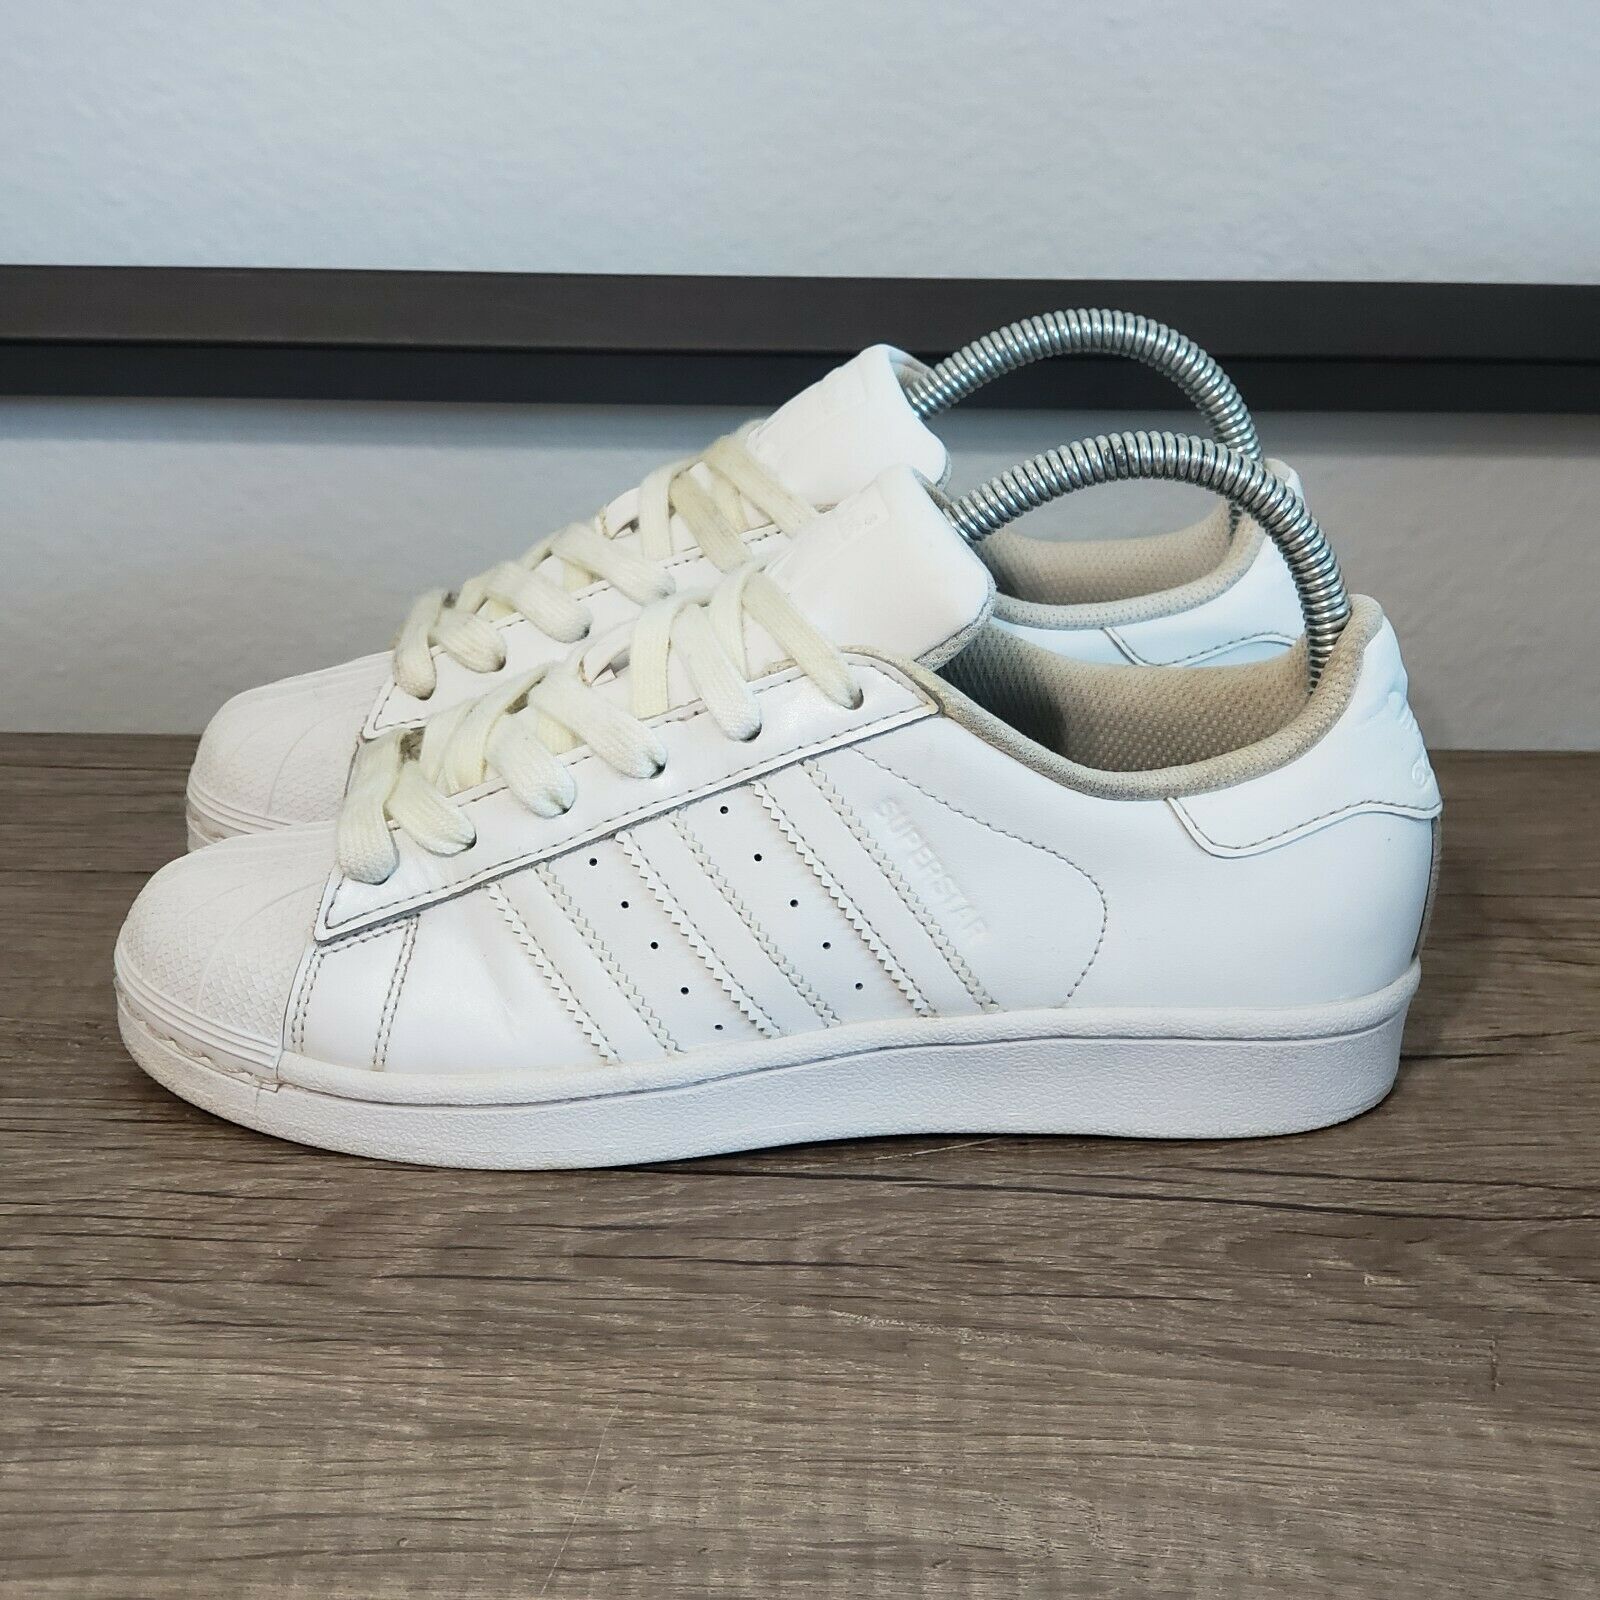 Adidas Superstar Youth Casual Shoes Size 4 White